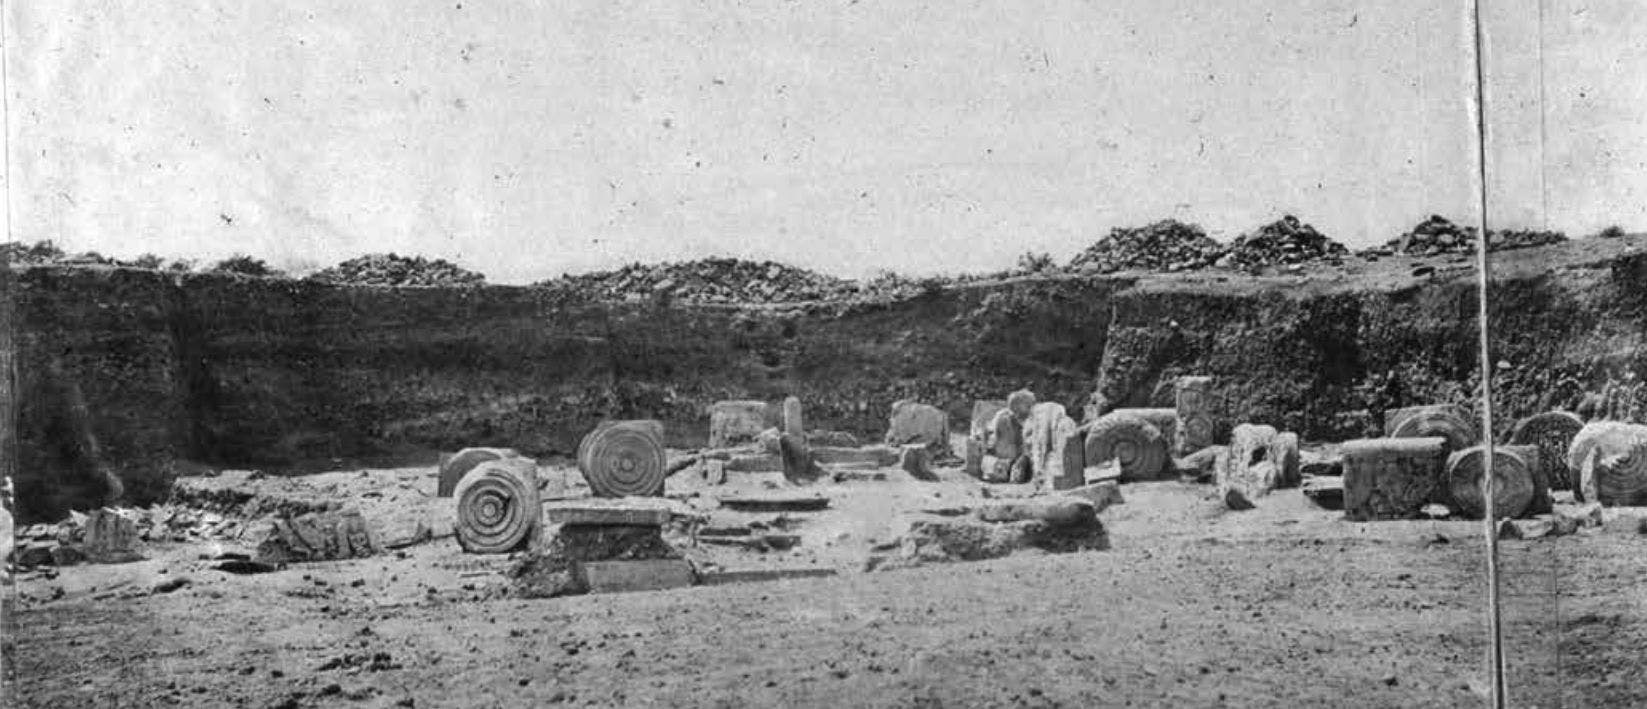 Excavation of the south gate of the Amaravati stupa by J G Horsfall in 1880